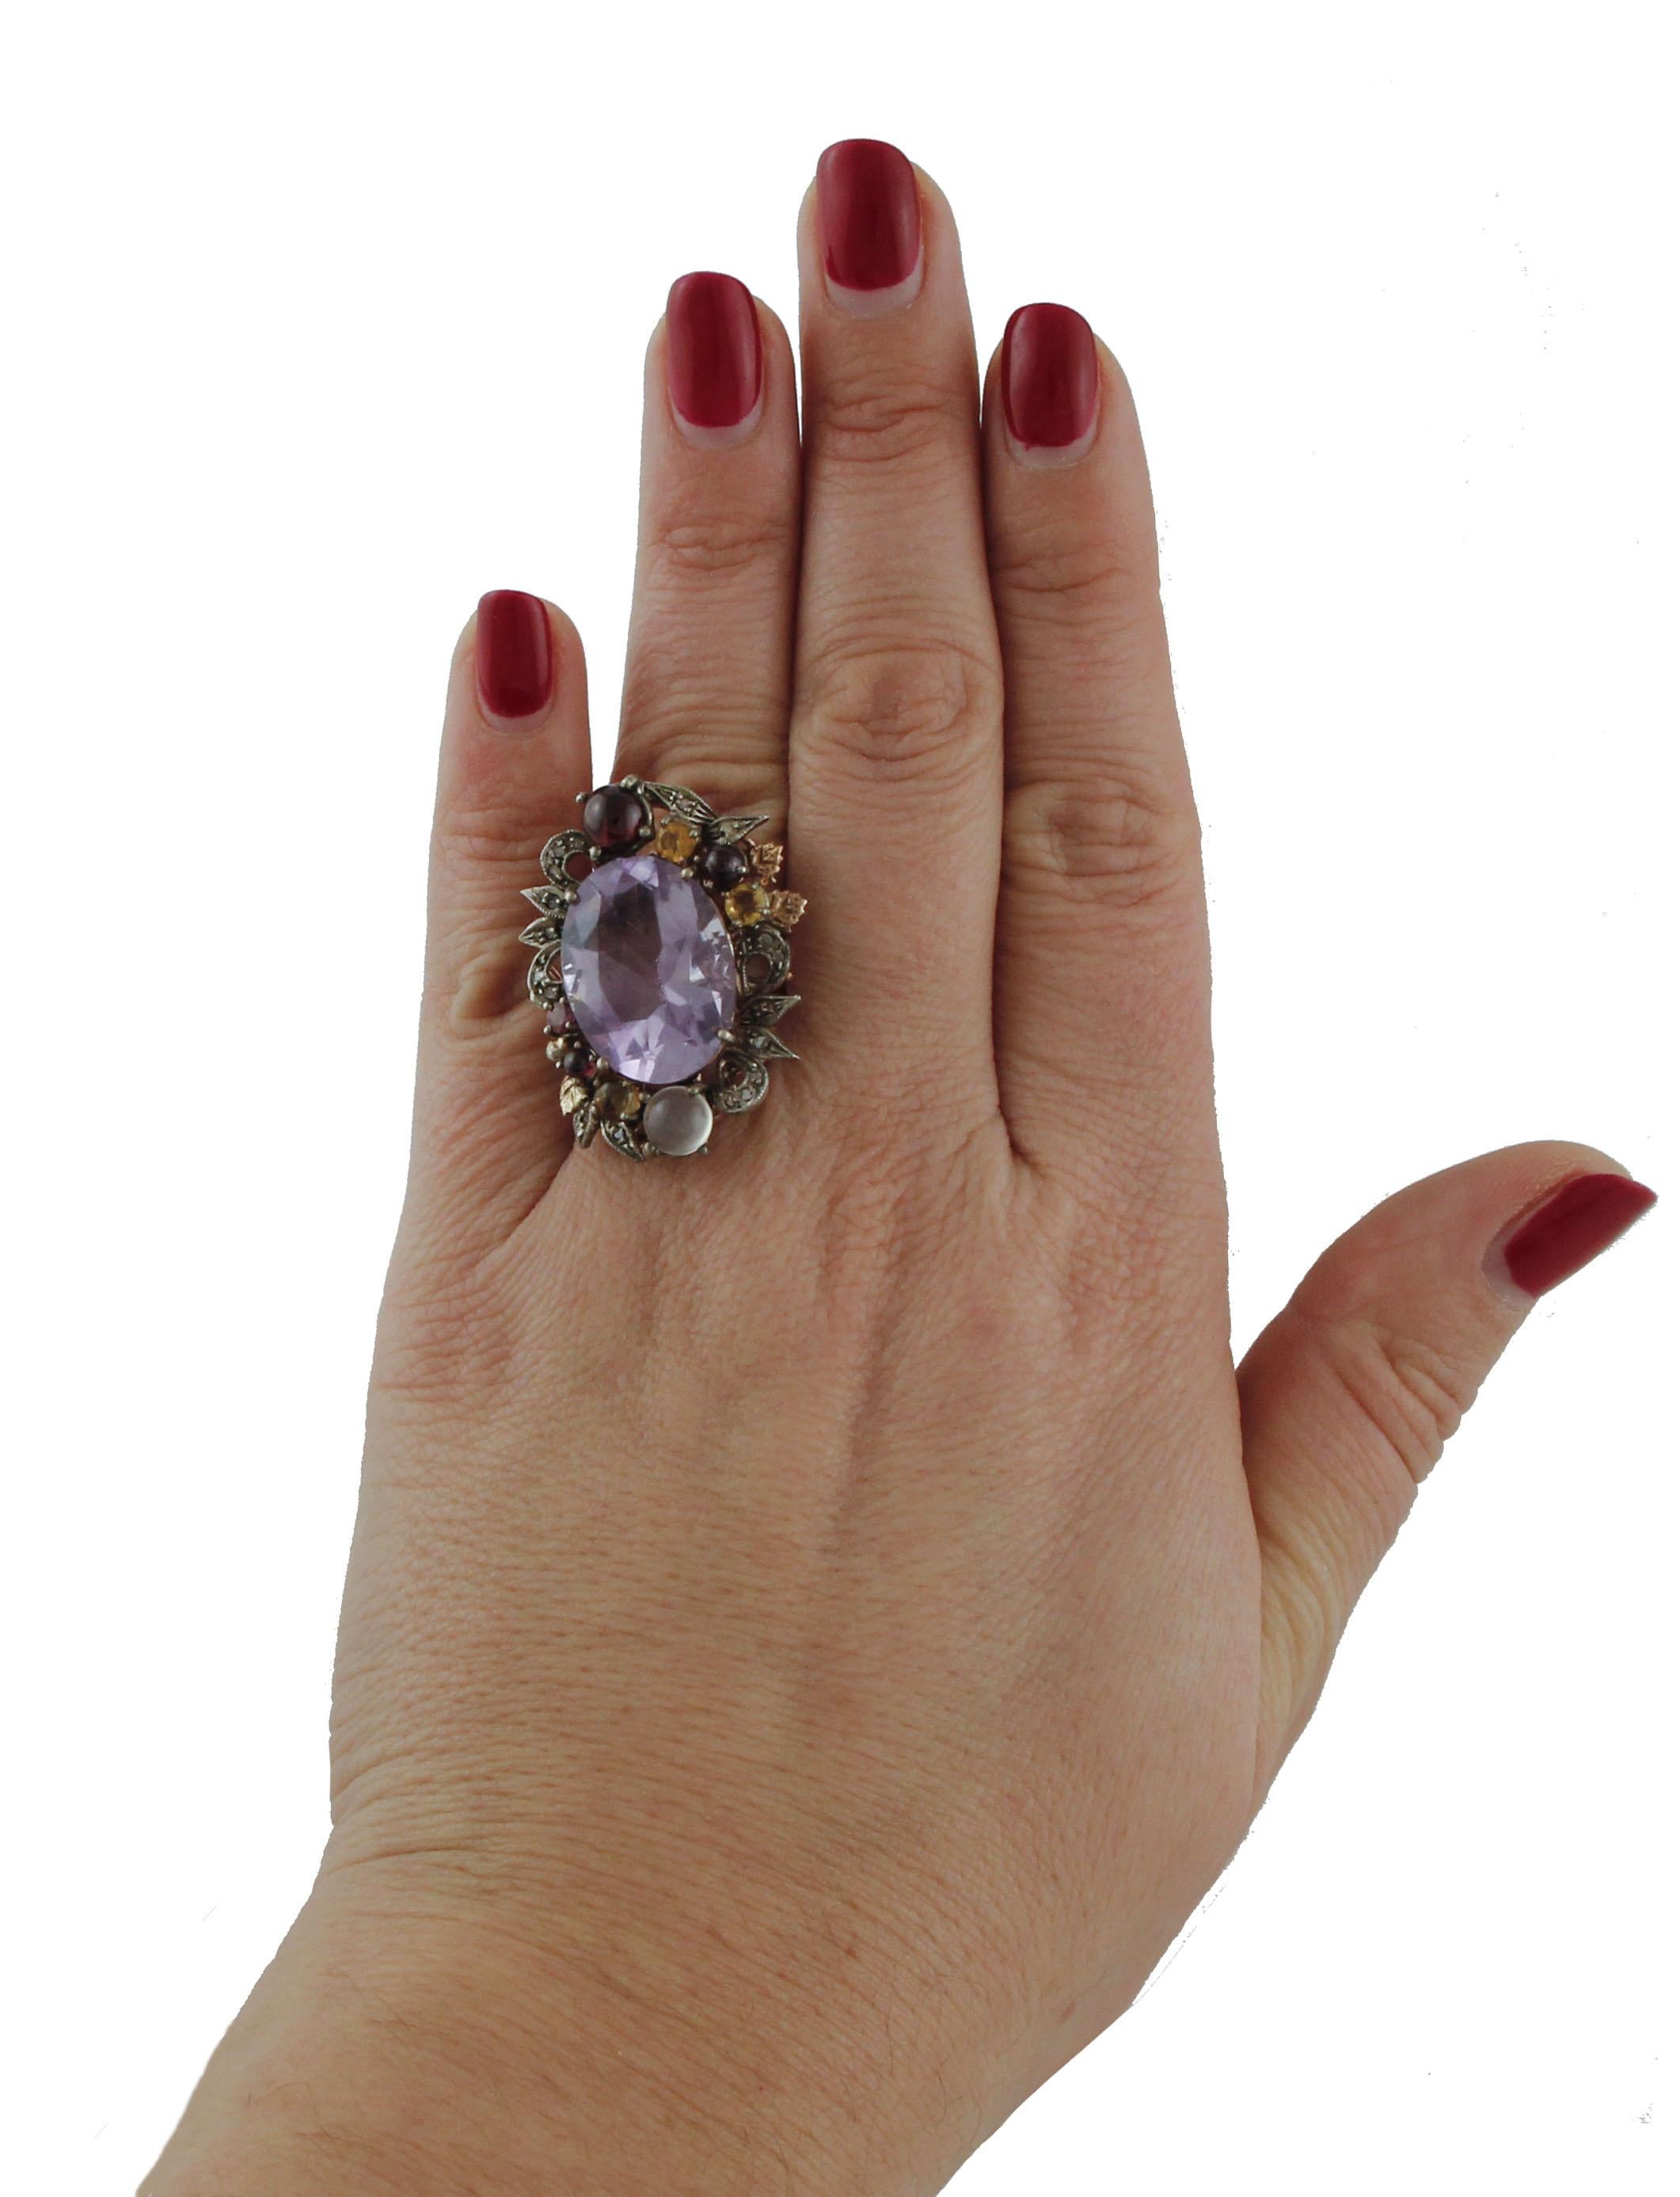 Women's Diamonds Amethyst Yellow Topazes, Garnets Moonstone Rose Gold and Silver Ring